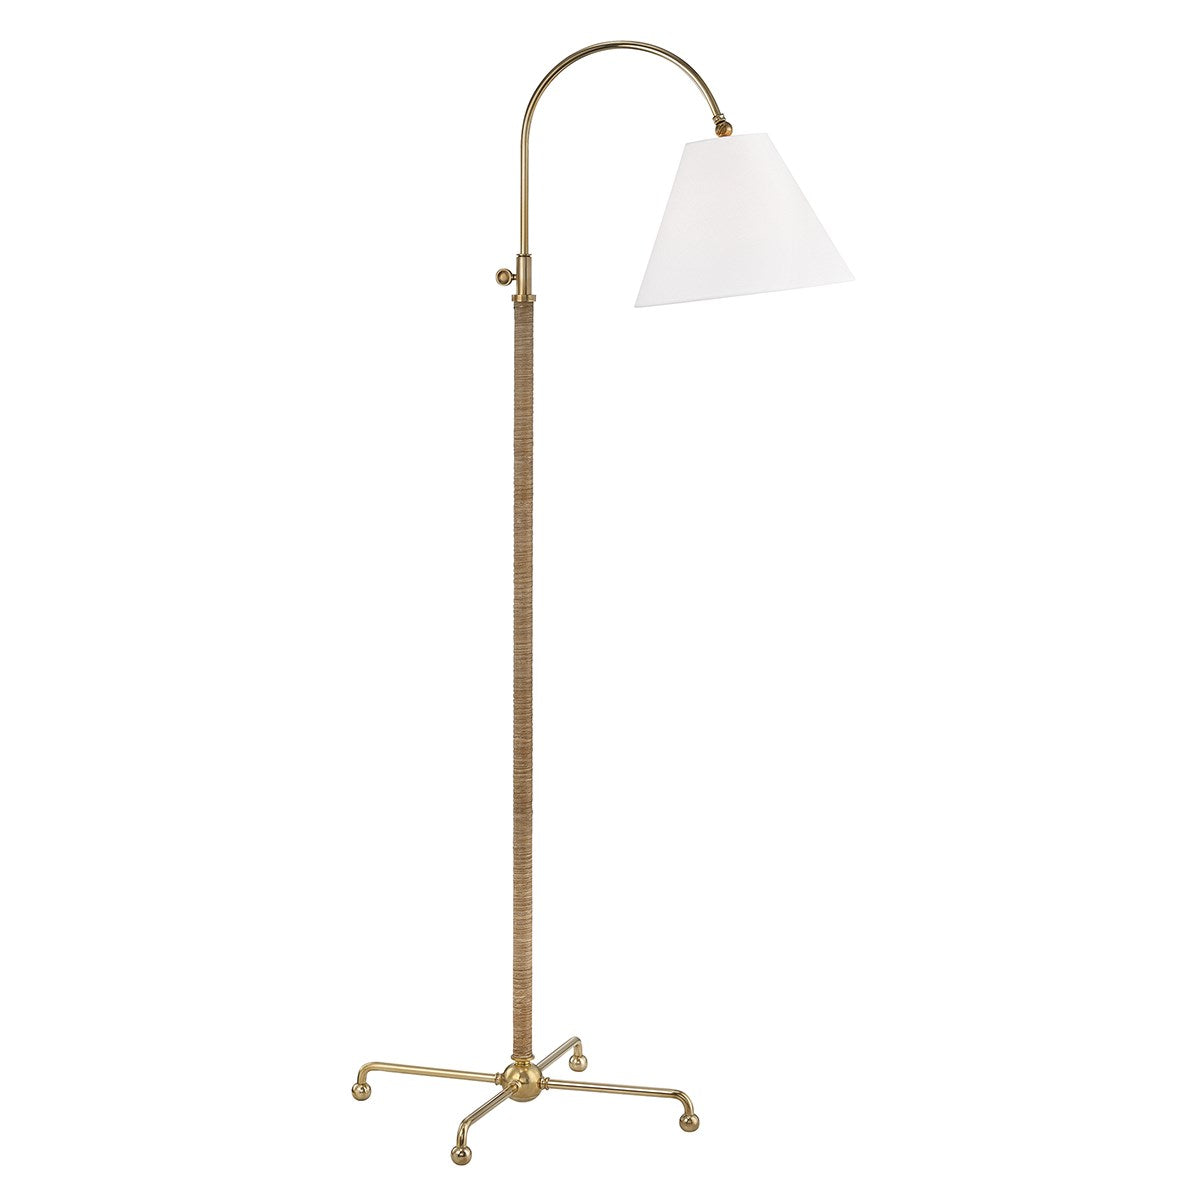 Curves No.1 - 1 LIGHT FLOOR LAMP W/ RATTAN ACCENT Lamp Hudson Valley Aged Brass  